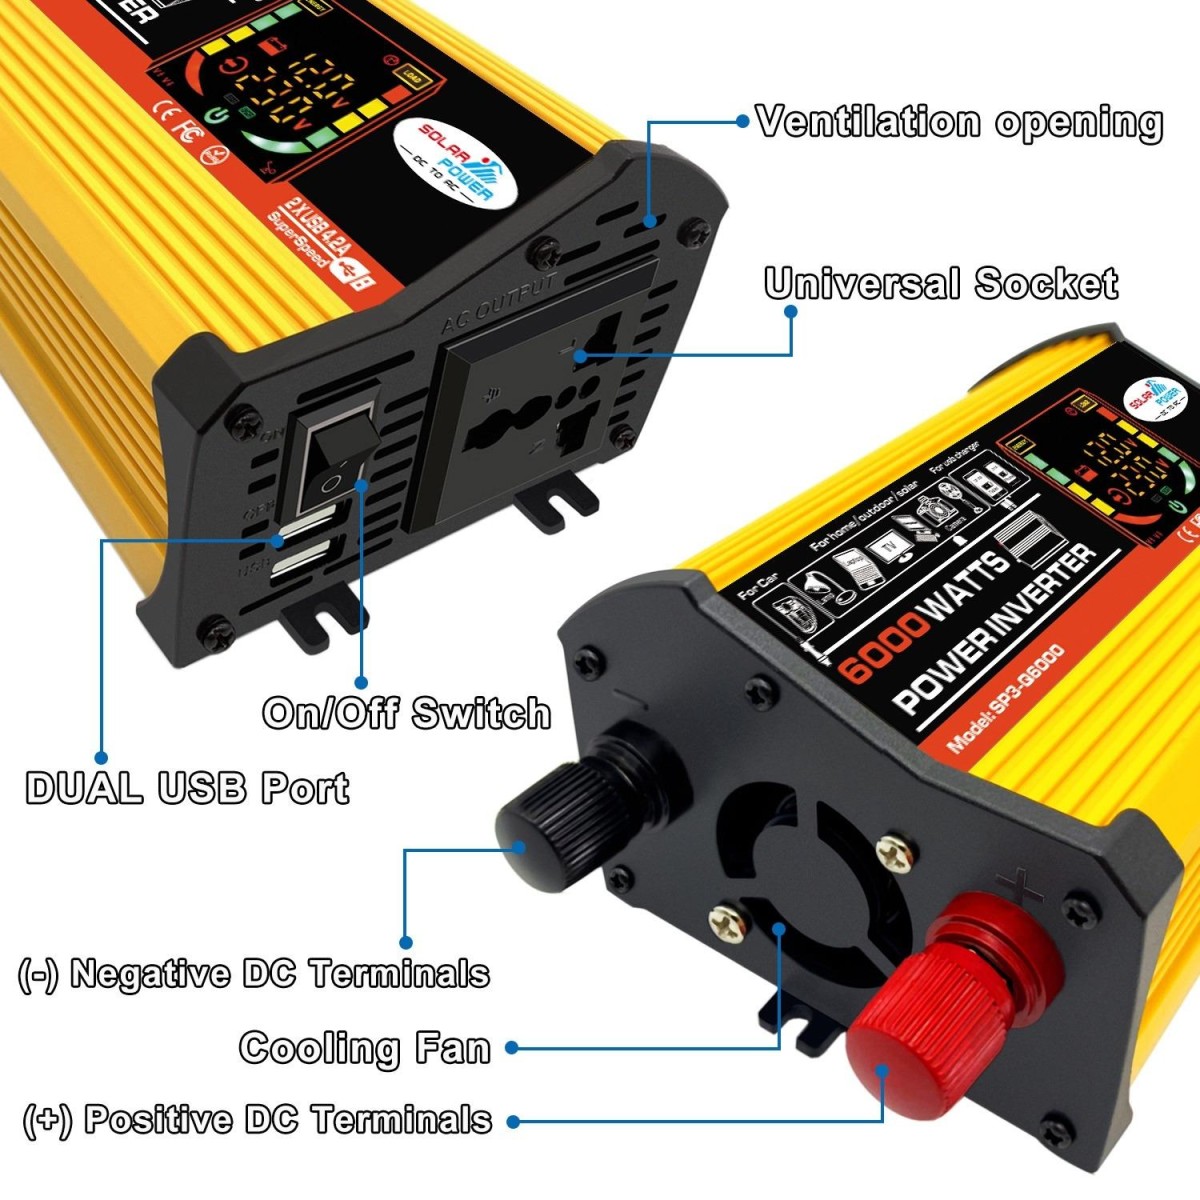 Legend III Generation DC12V to AC110V 6000W Car Power Inverter with LED Display(Yellow)